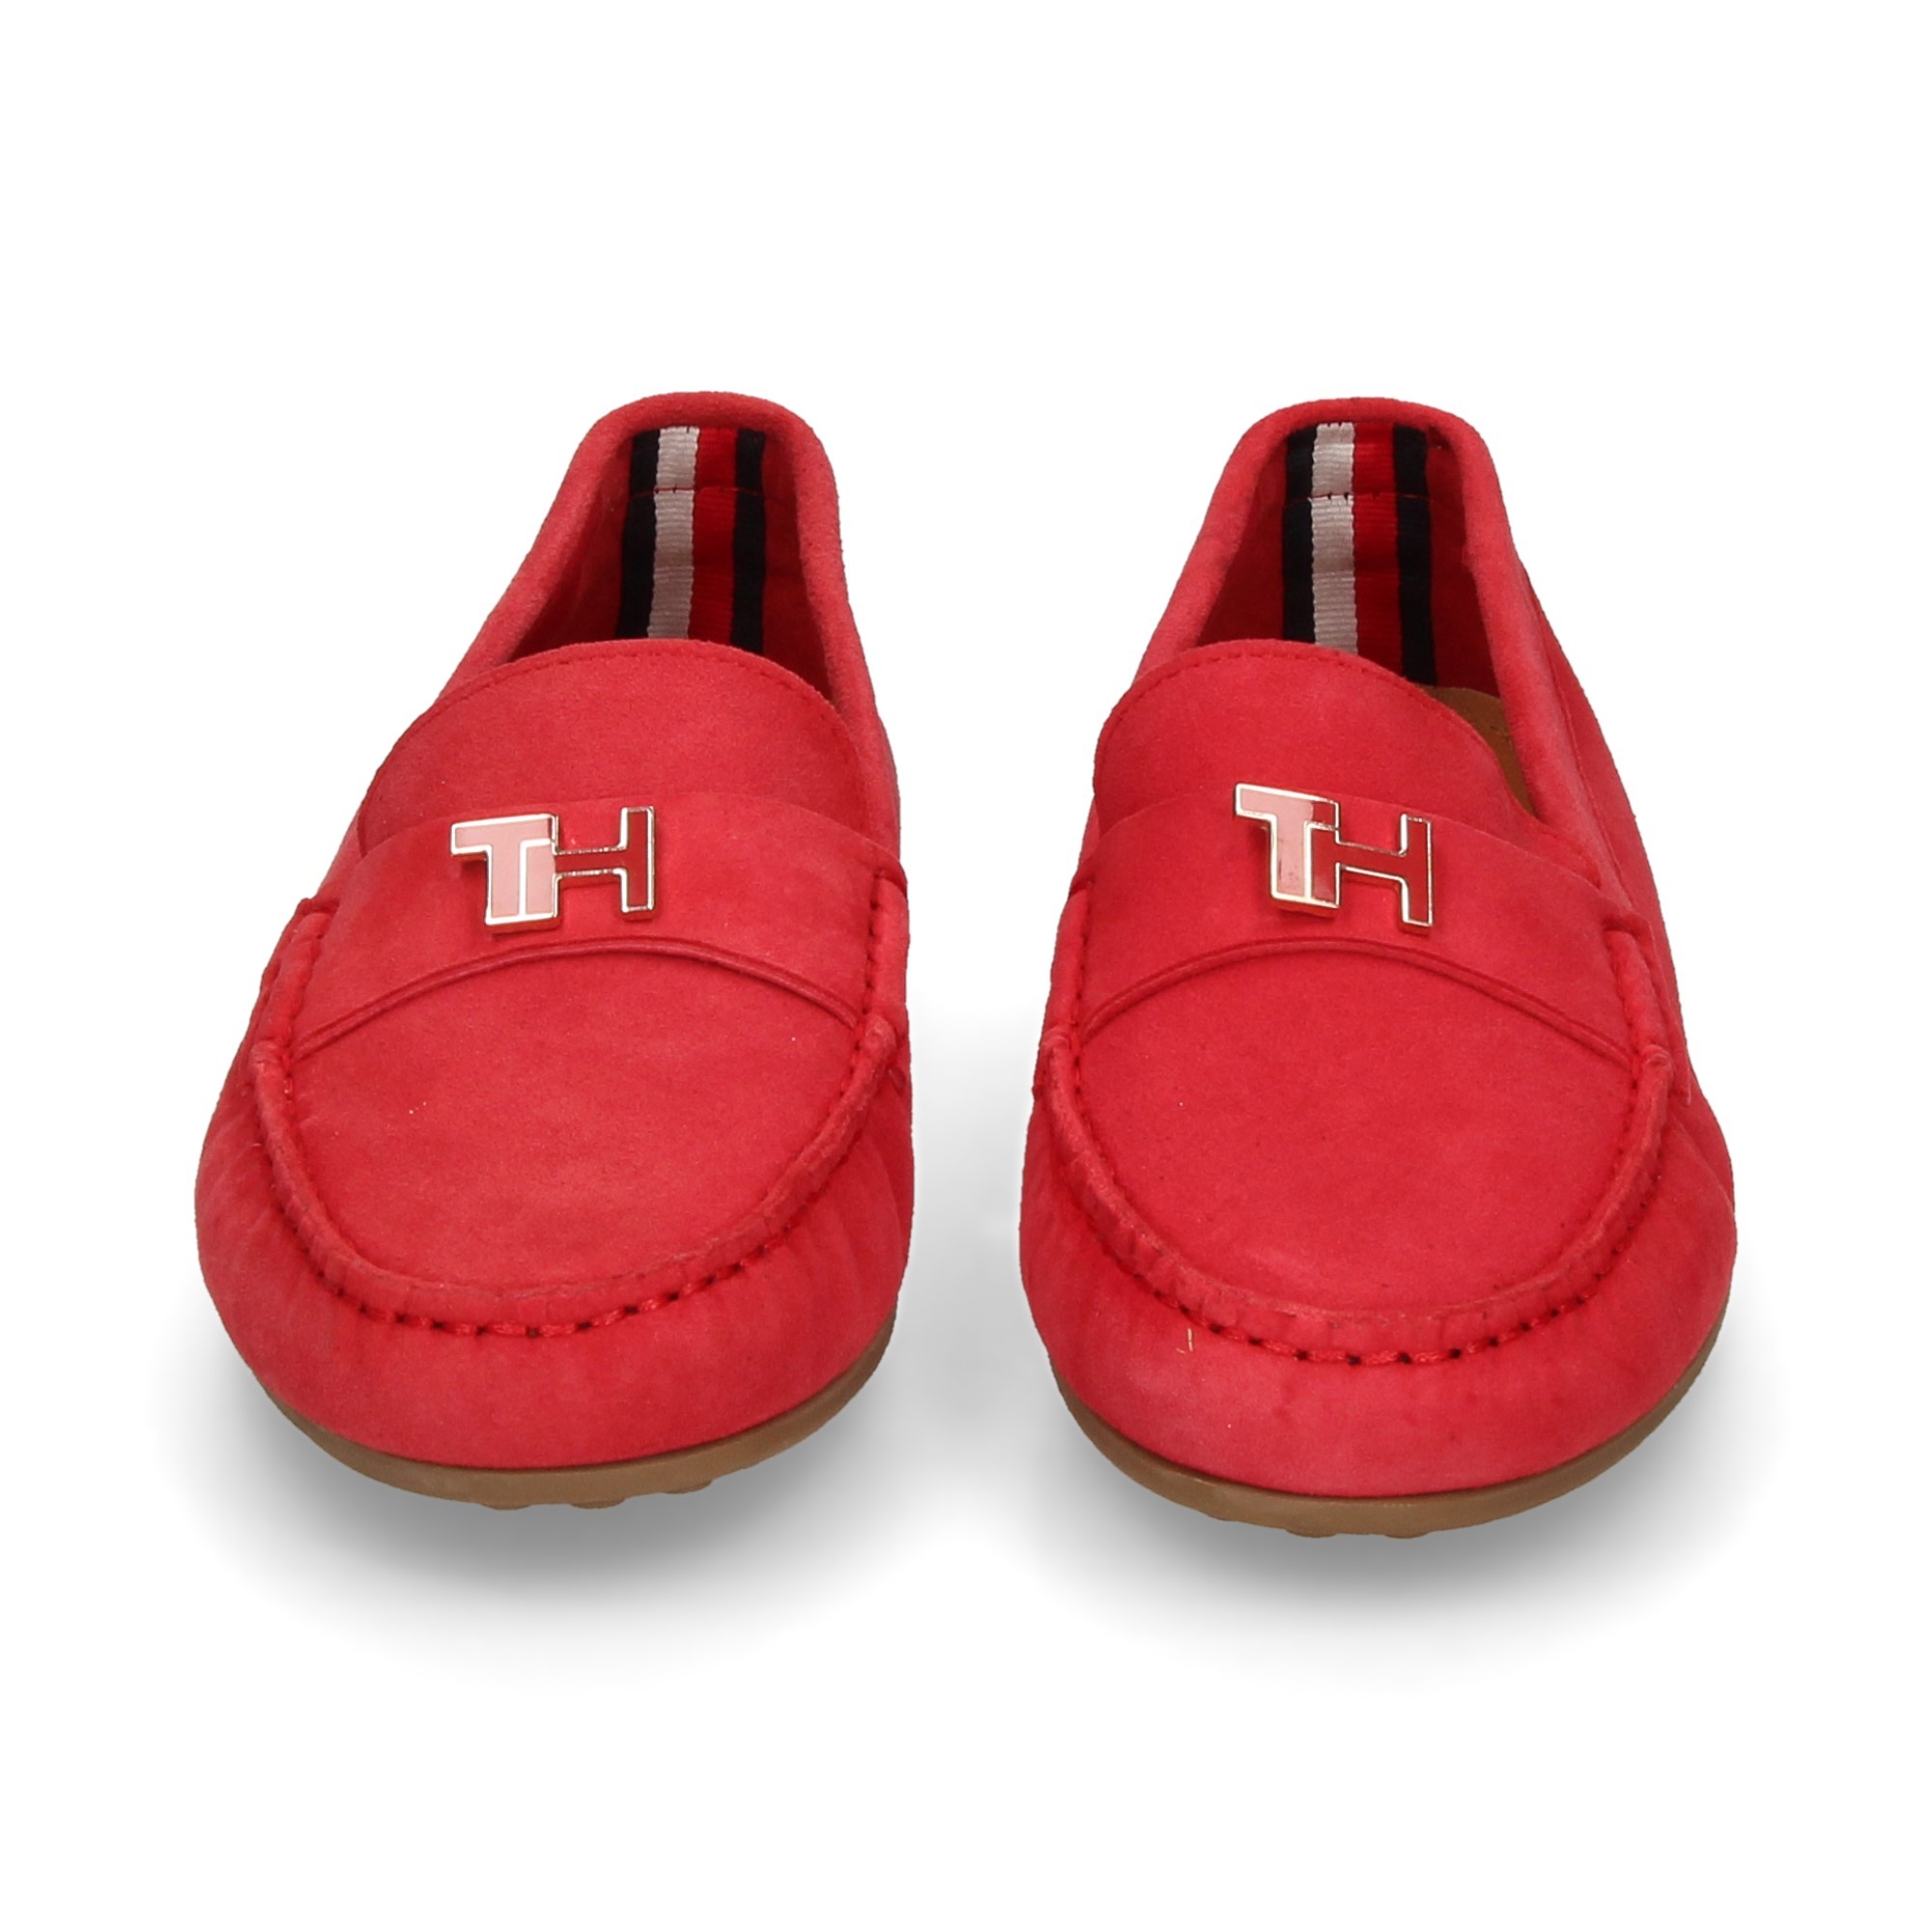 moccasin-adorned-suede-red